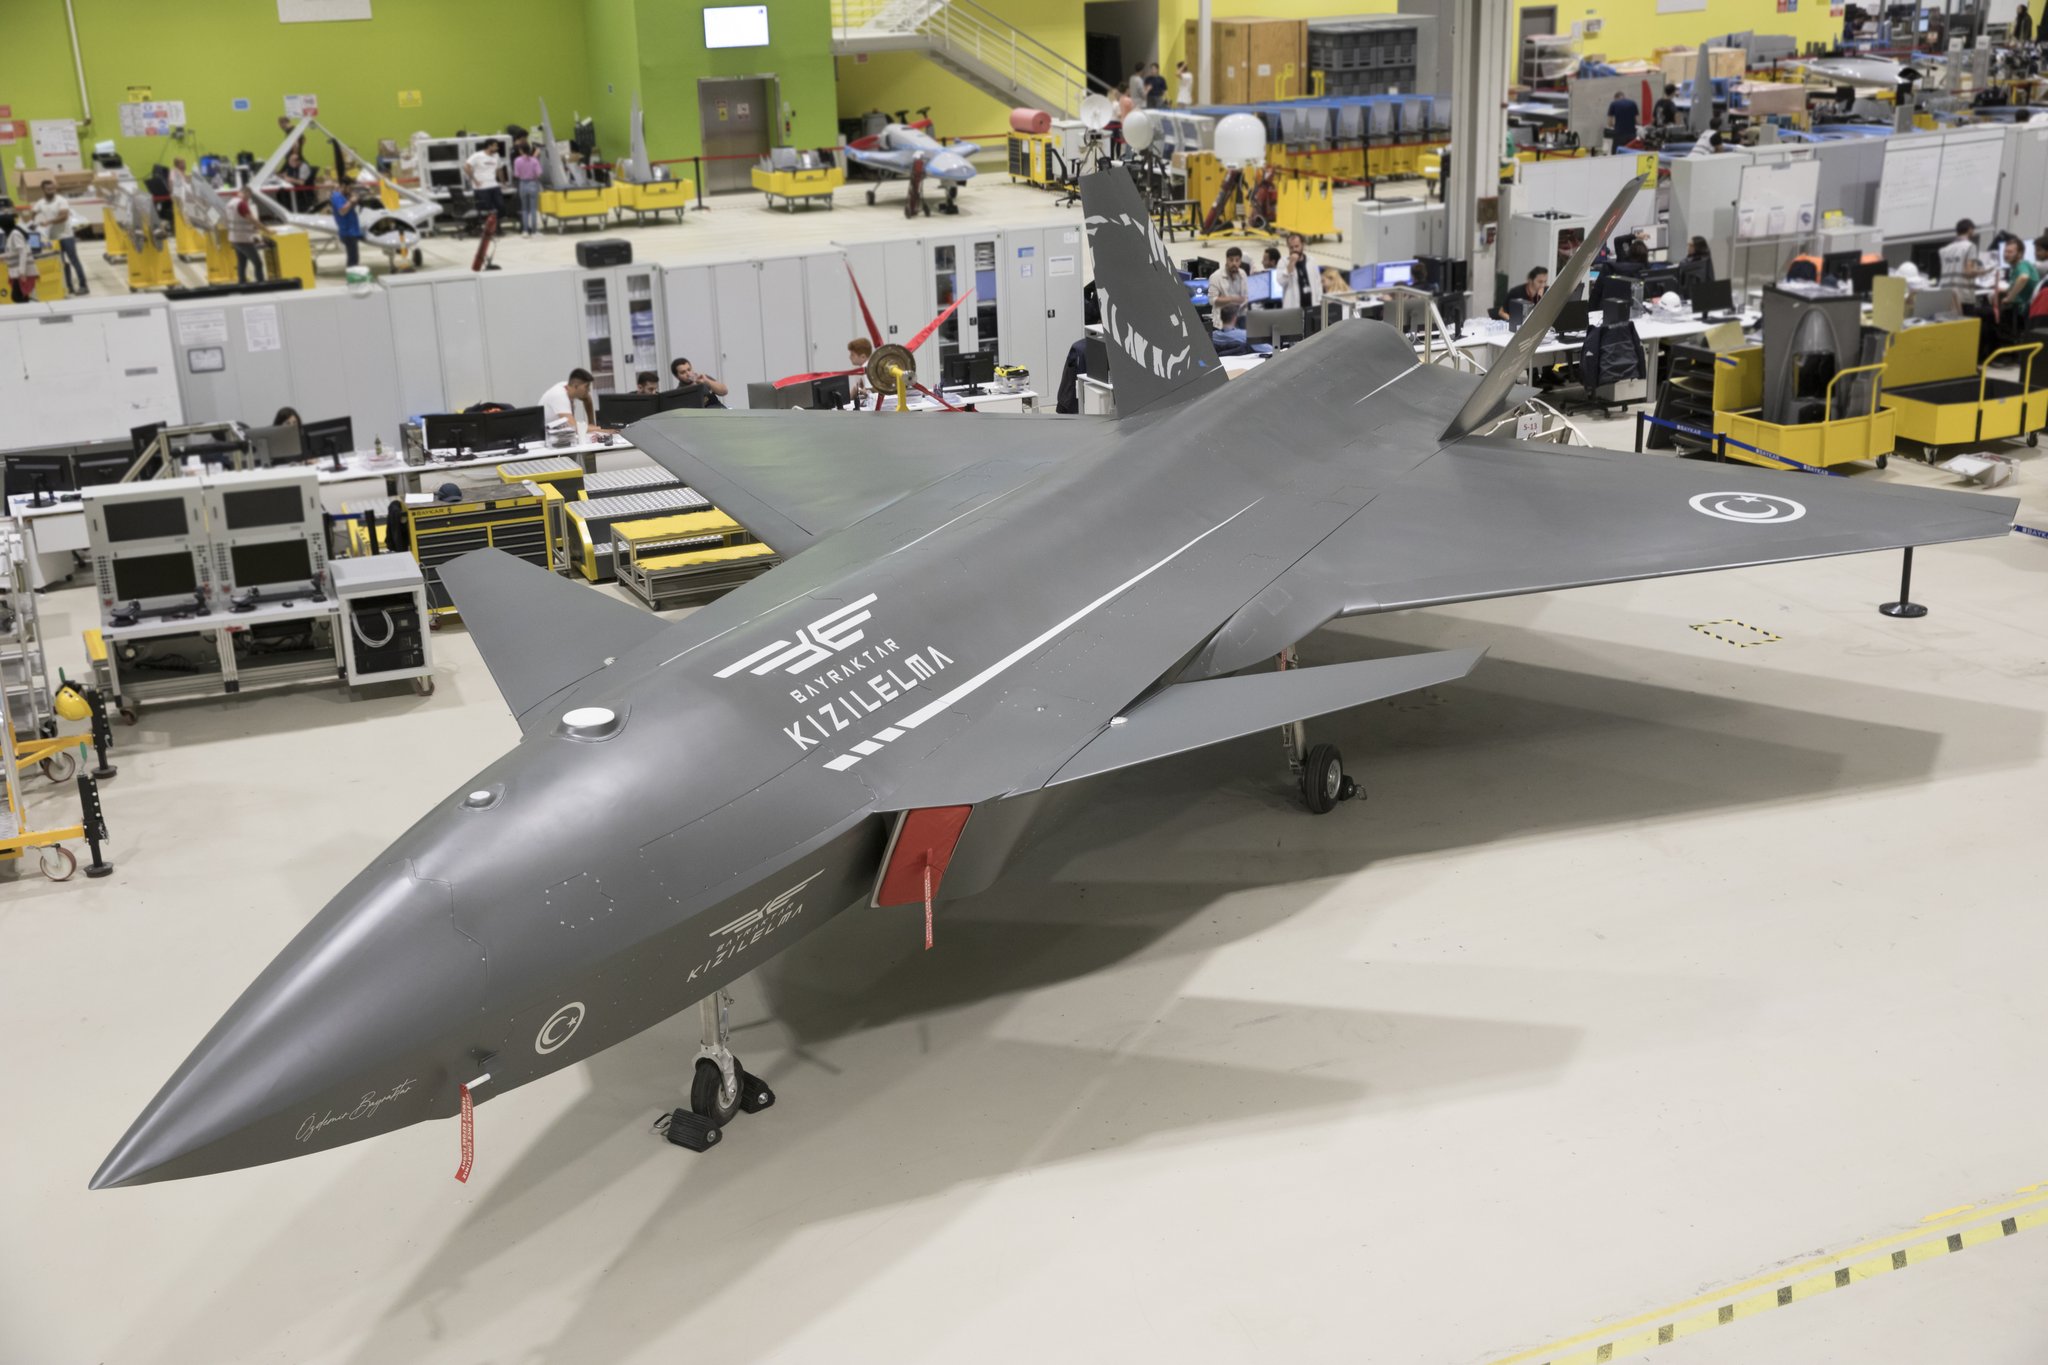 Baykar published the first photos of the new prototype supersonic Bayraktar Kizilelma drone